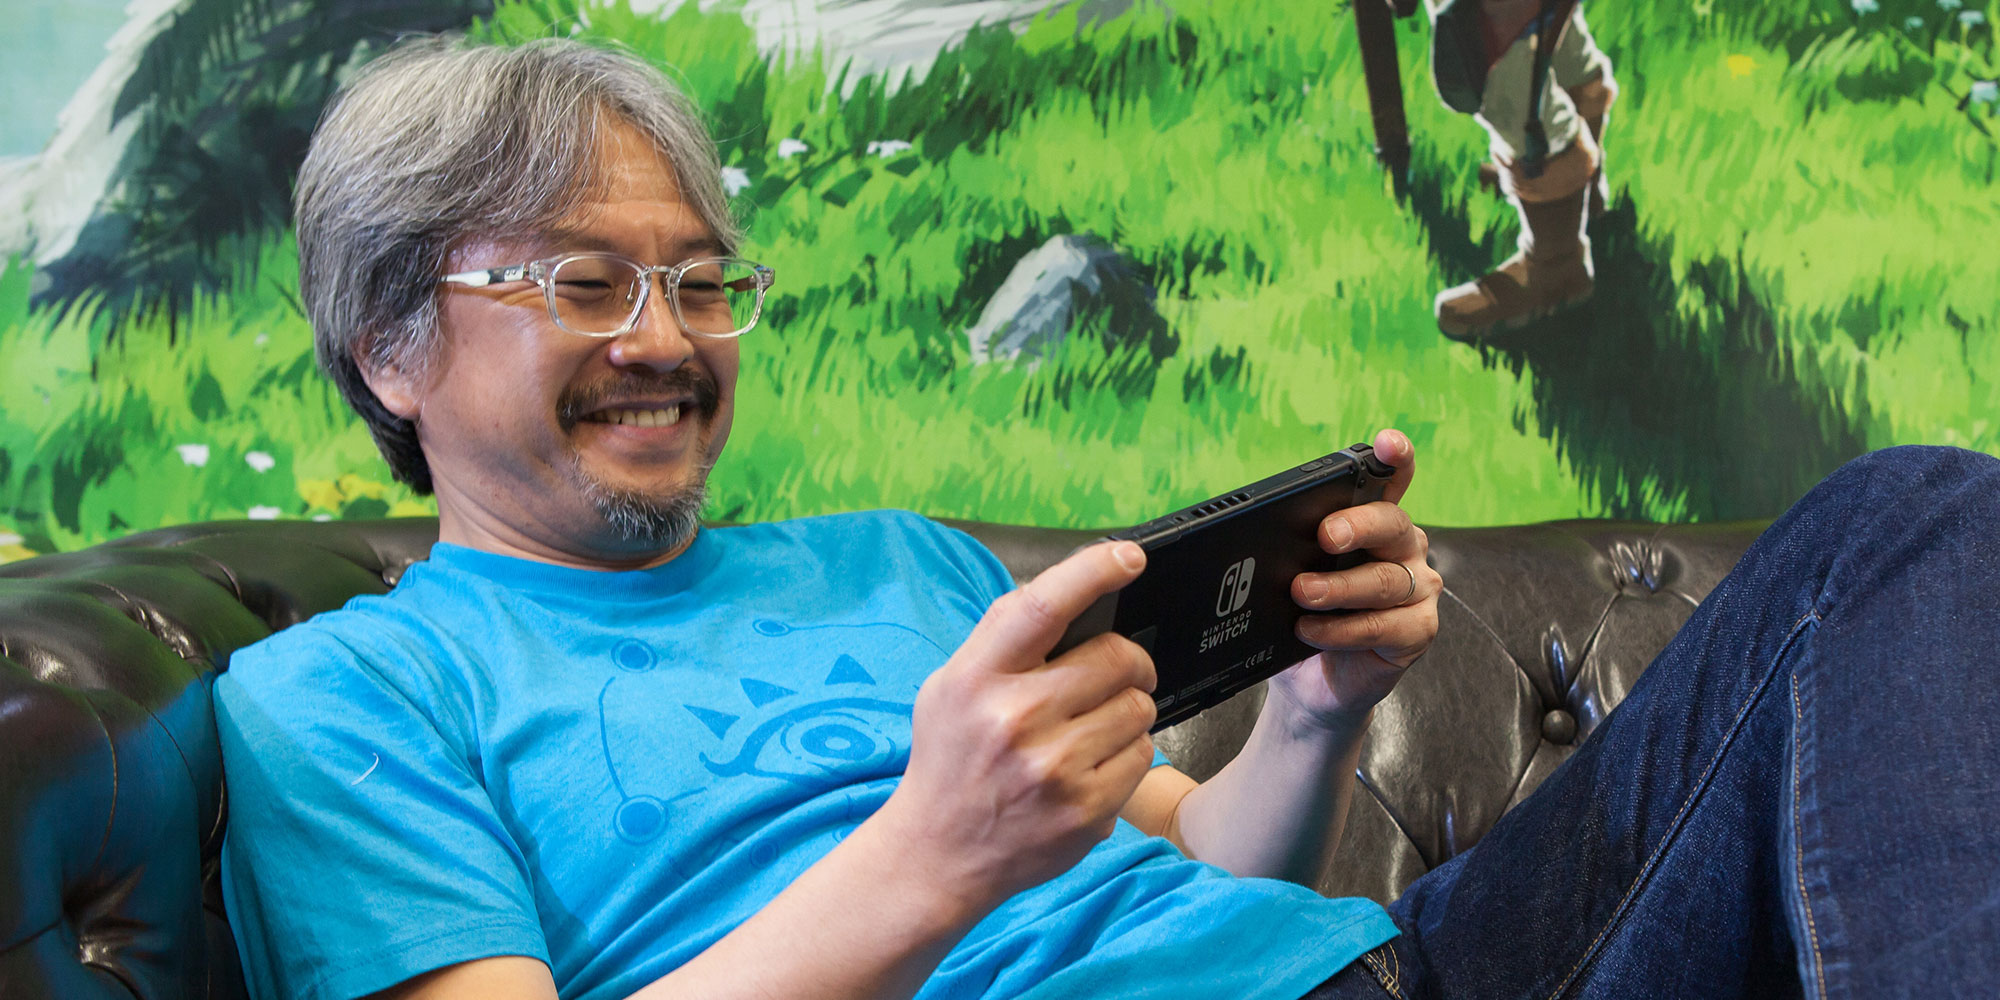 Find out some of Eiji Aonuma’s favourite things from The Legend of Zelda series in our interview!